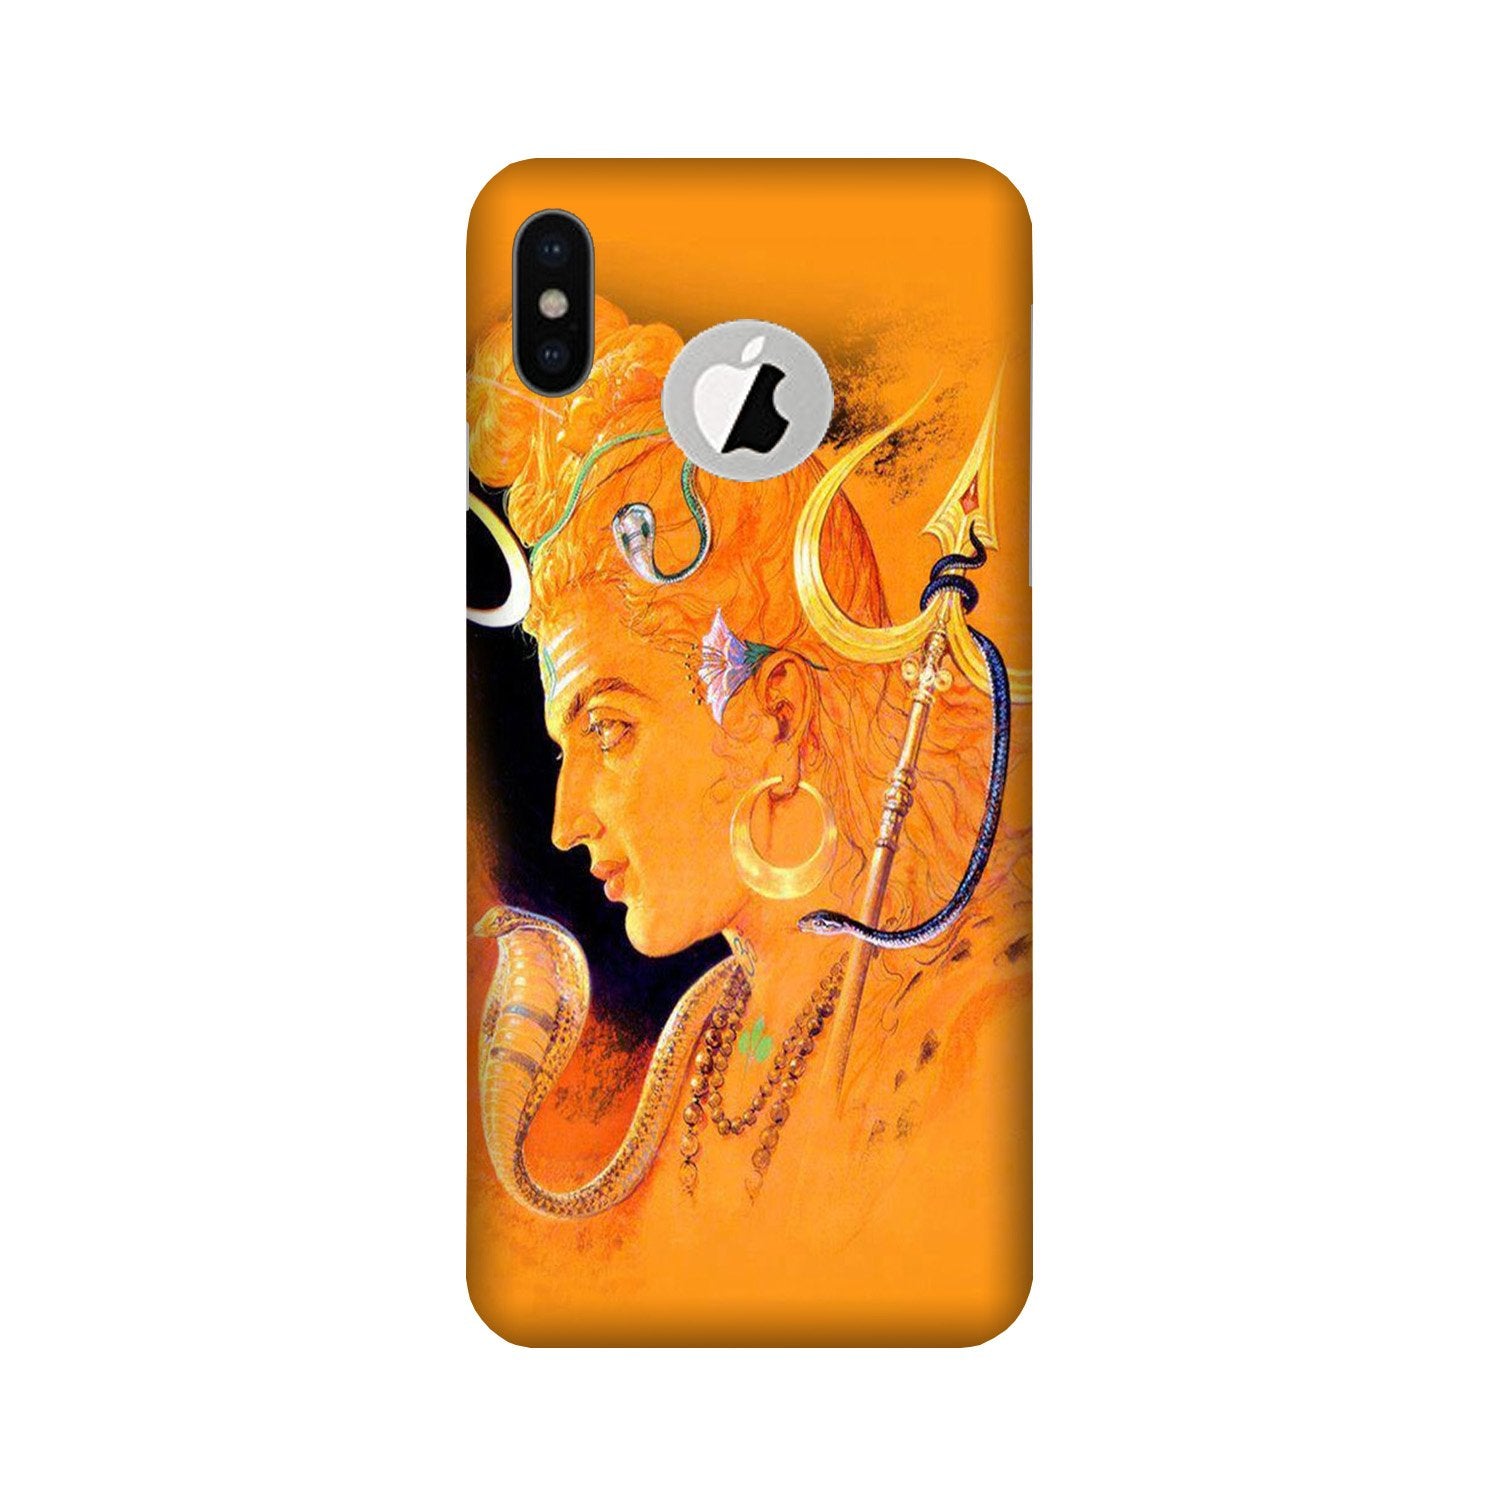 Lord Shiva Case for iPhone Xs logo cut  (Design No. 293)